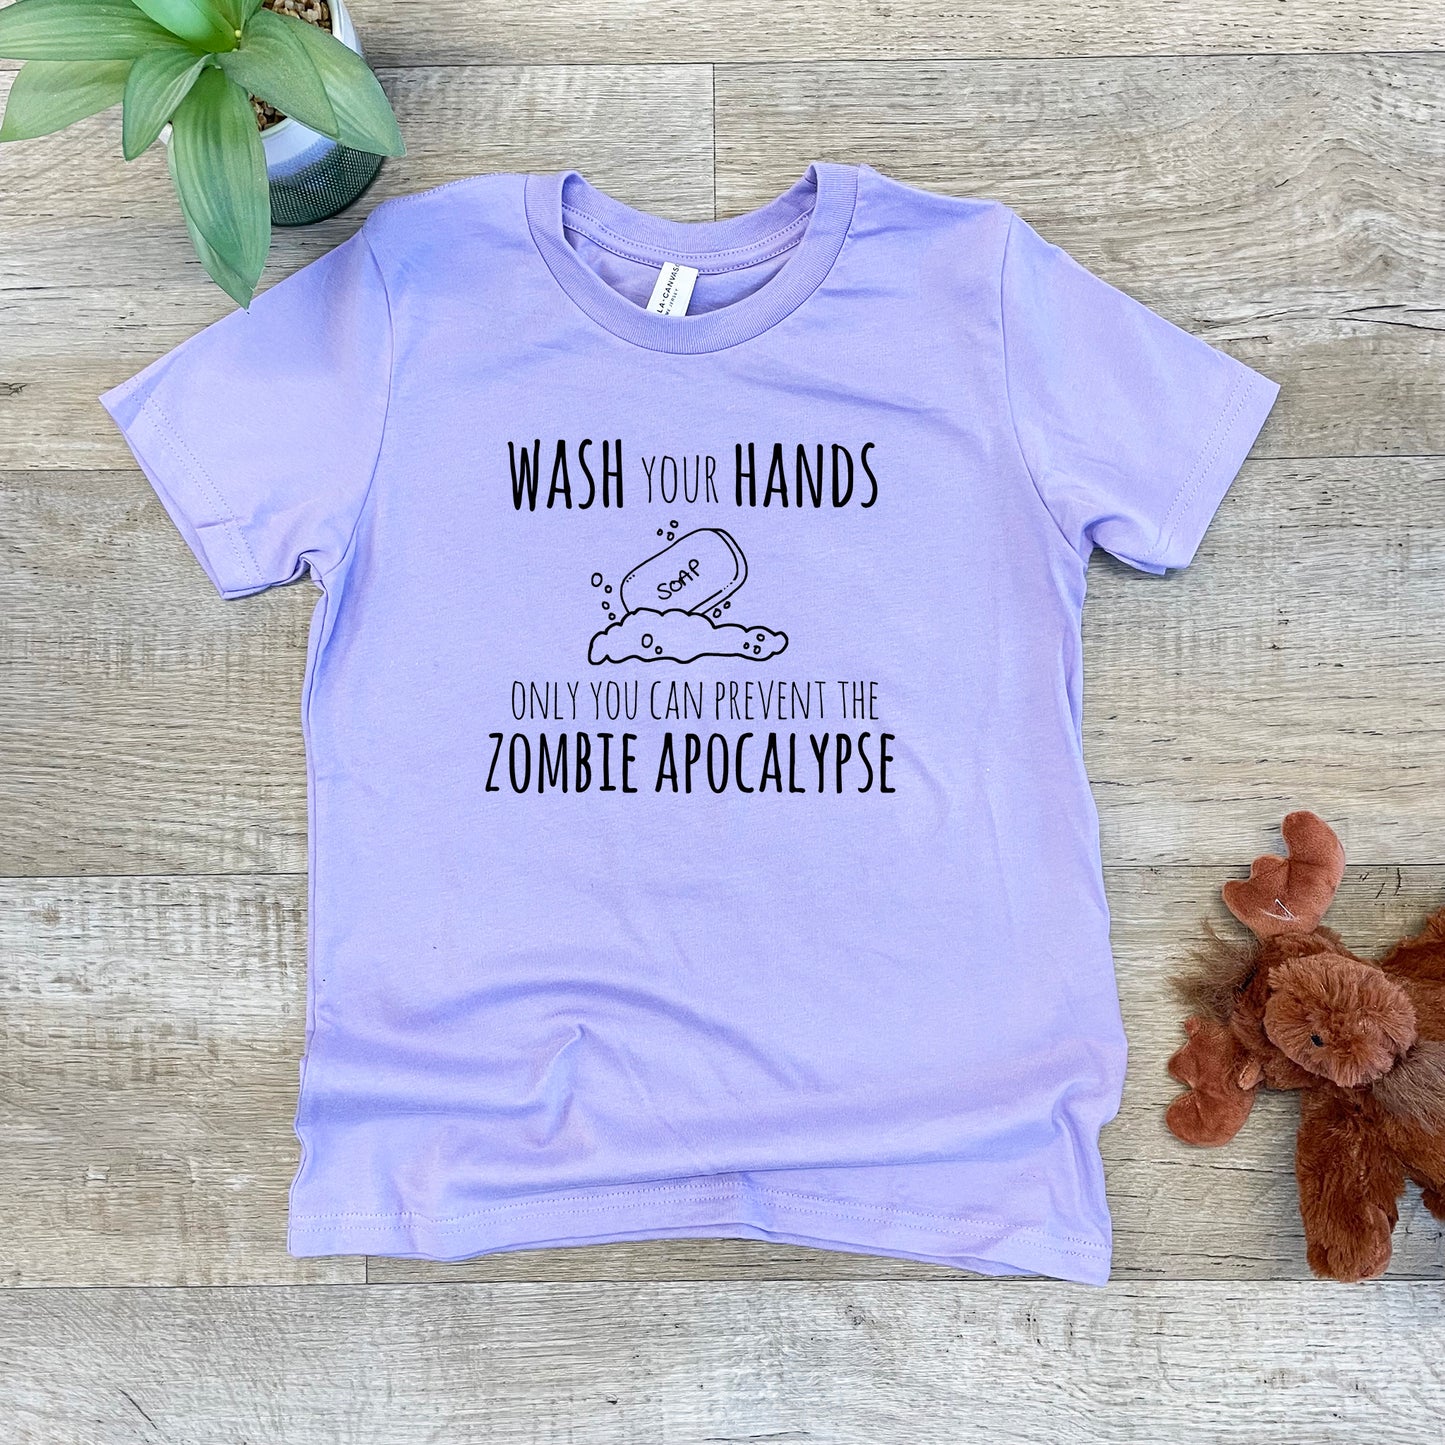 Wash Your Hands Only You Can Prevent The Zombie Apocalypse - Kid's Tee - Columbia Blue or Lavender